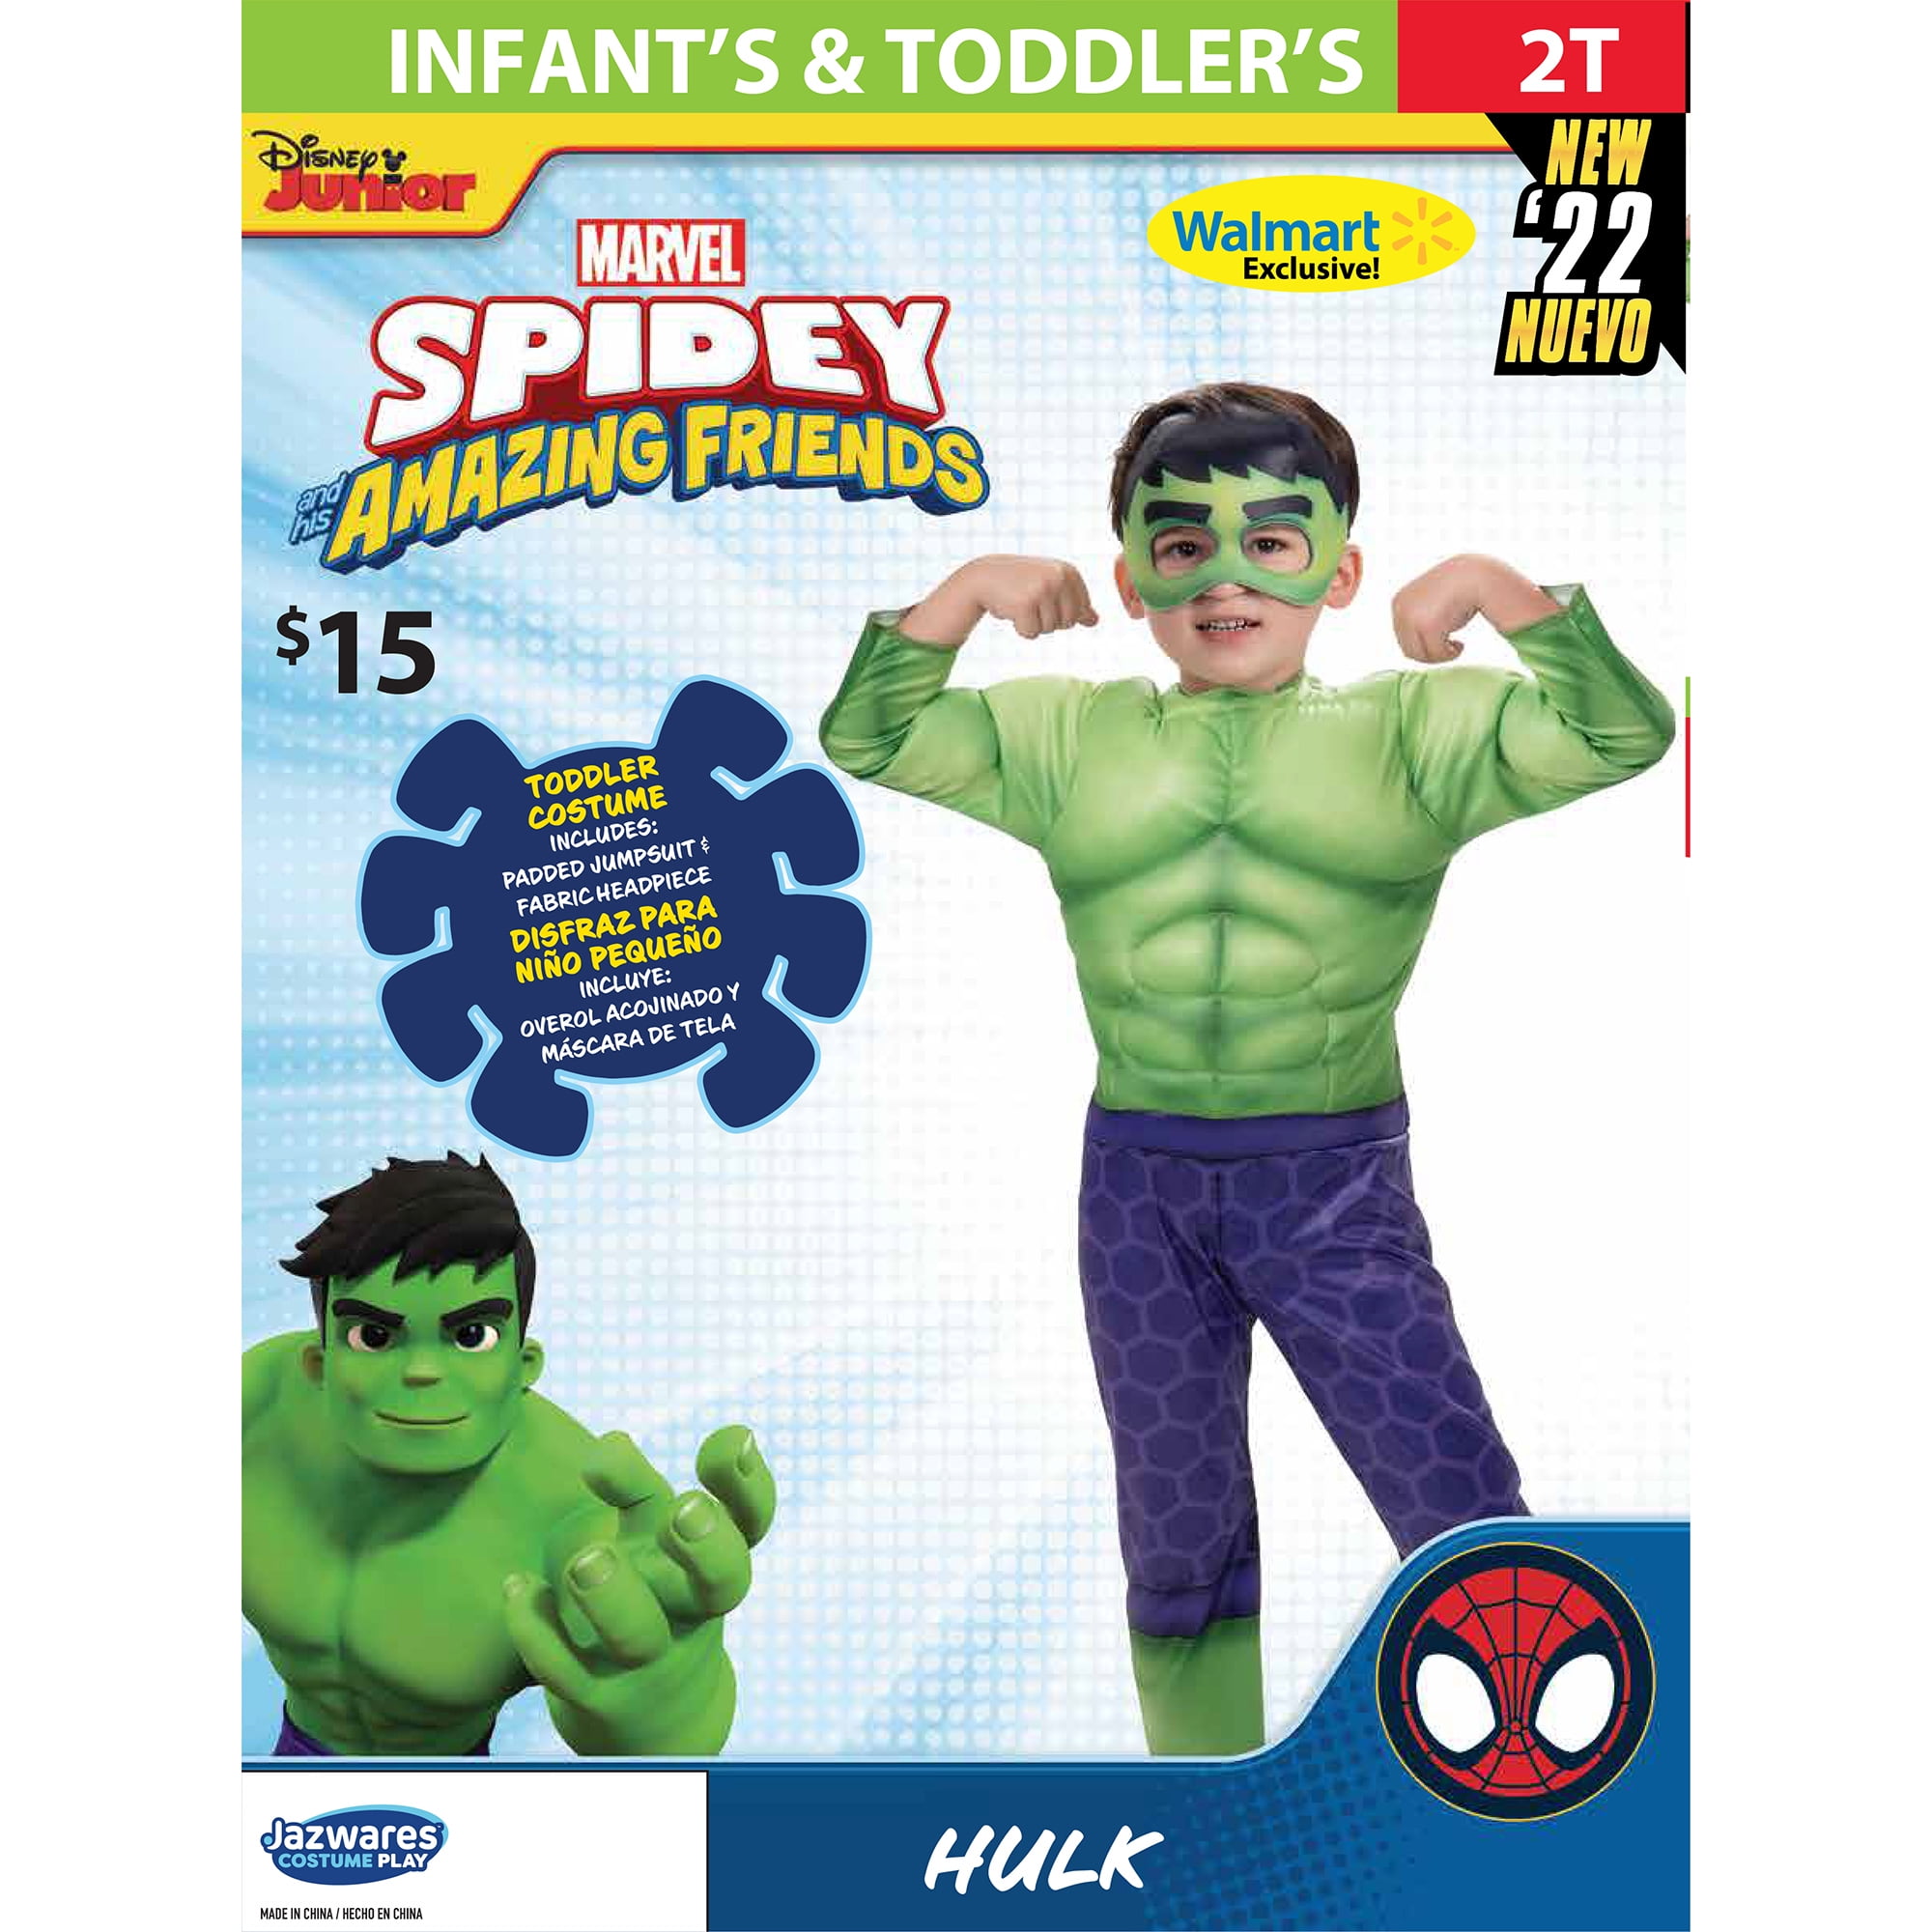 Marvel Hulk Toddler Muscle Chest Halloween Costume Size 2T. Ages 2+